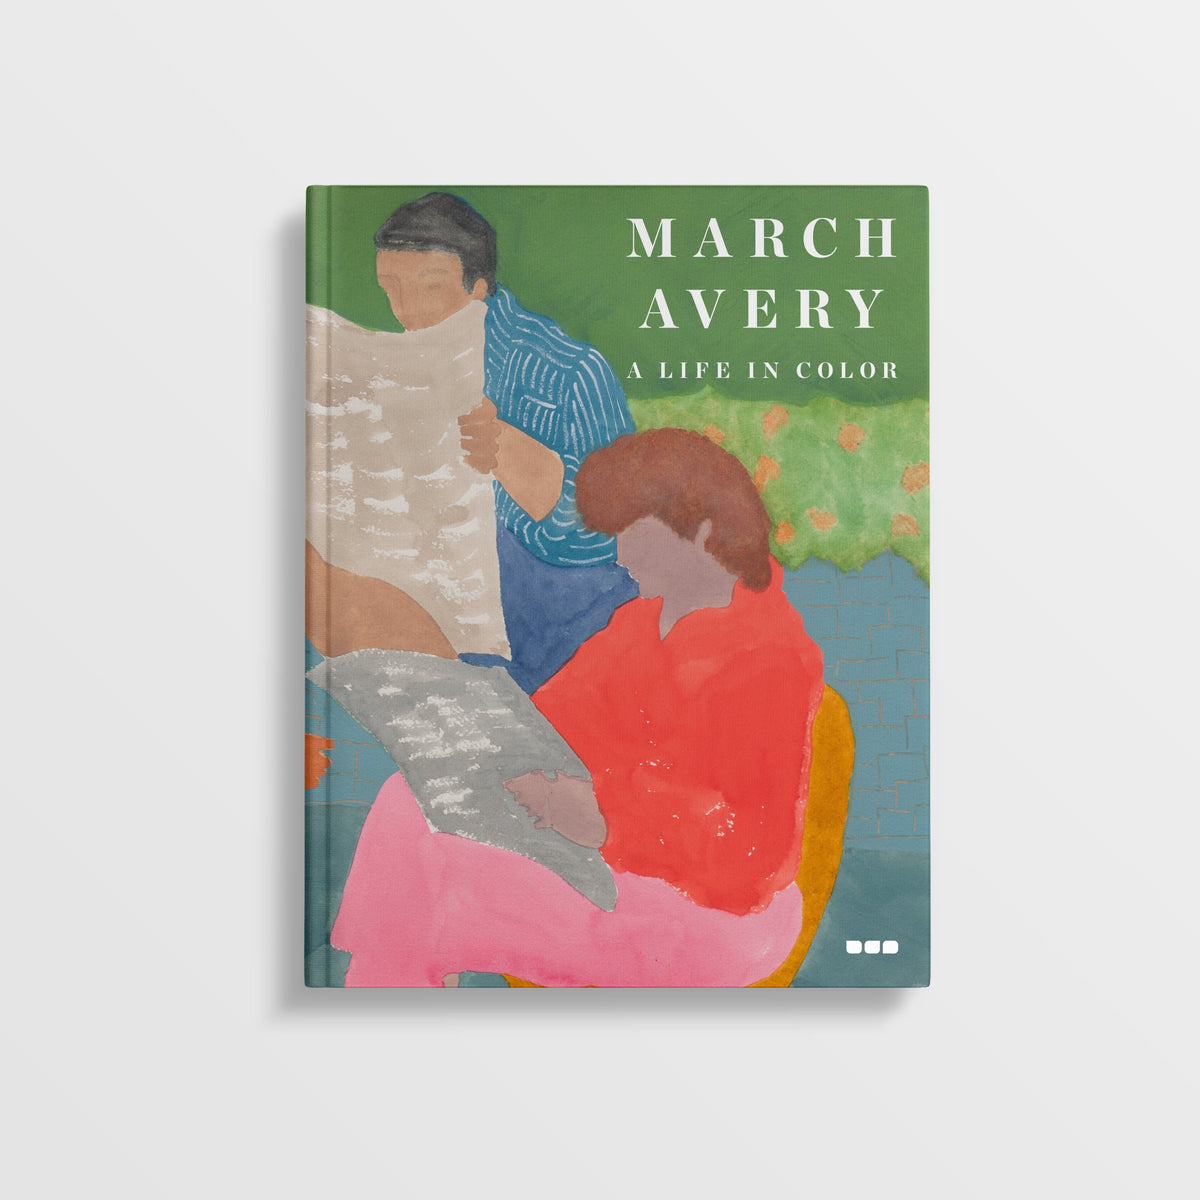 Cover of the book "March Avery: A Life in Color" by Black Dog Online showing an illustration reminiscent of her oil paintings, depicting a person in red reading a newspaper beside another person who is also reading, capturing the emotional depth characteristic of March Avery's work.